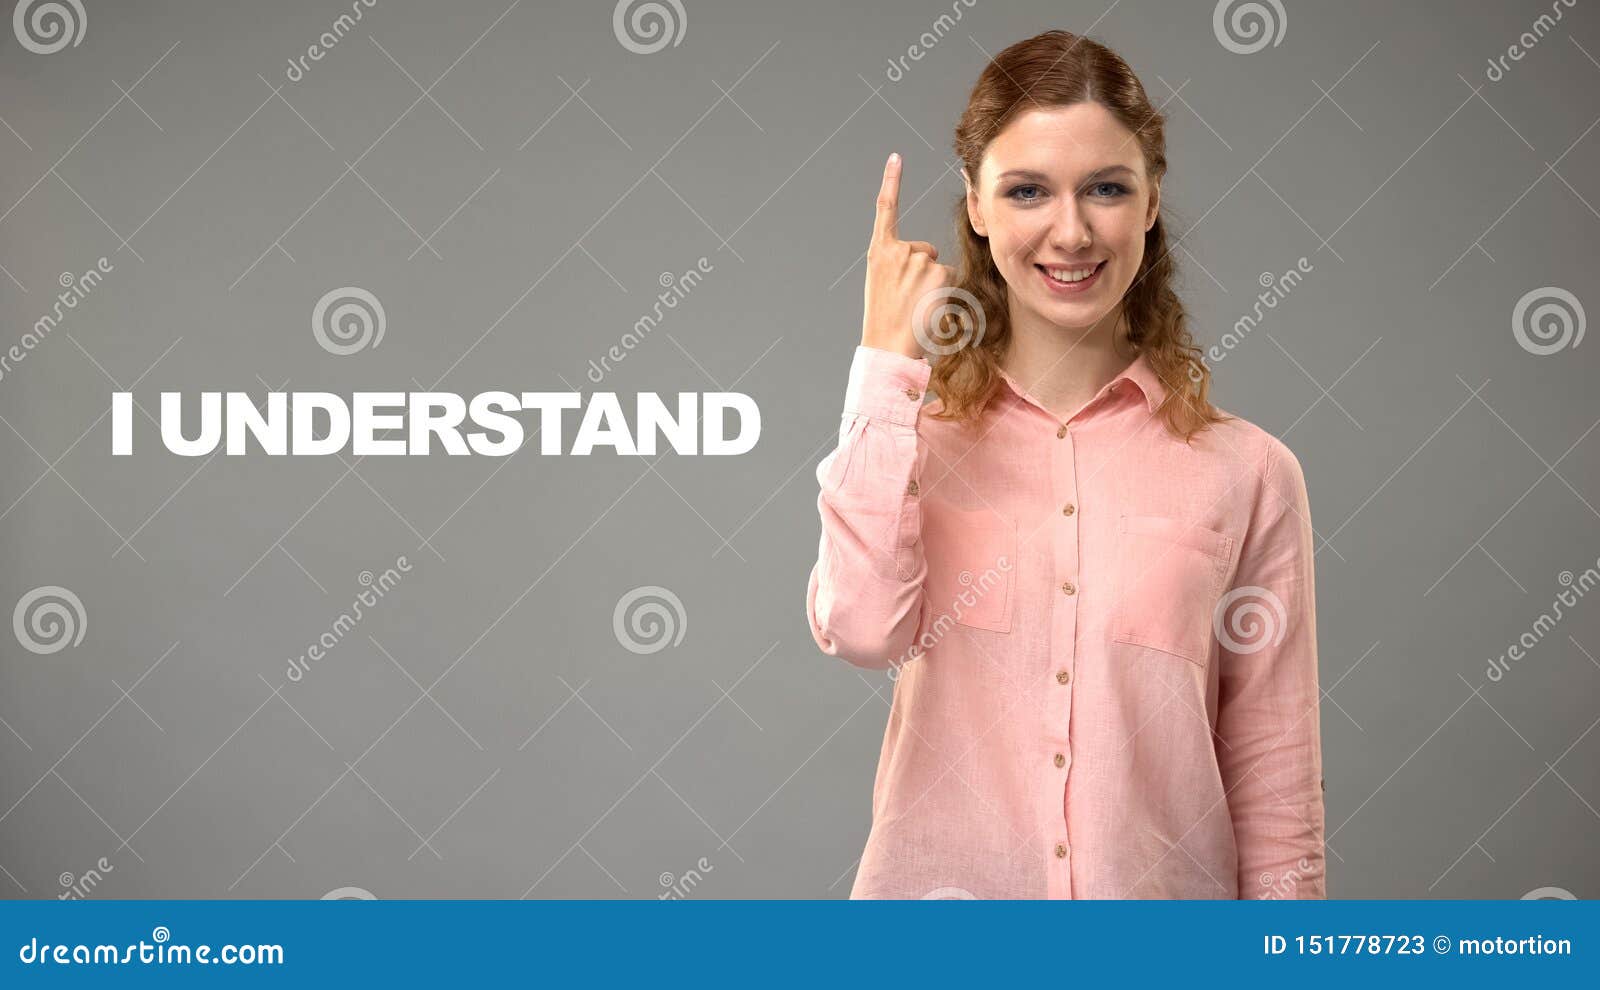 teacher saying i understand in asl, text on background, communication for deaf